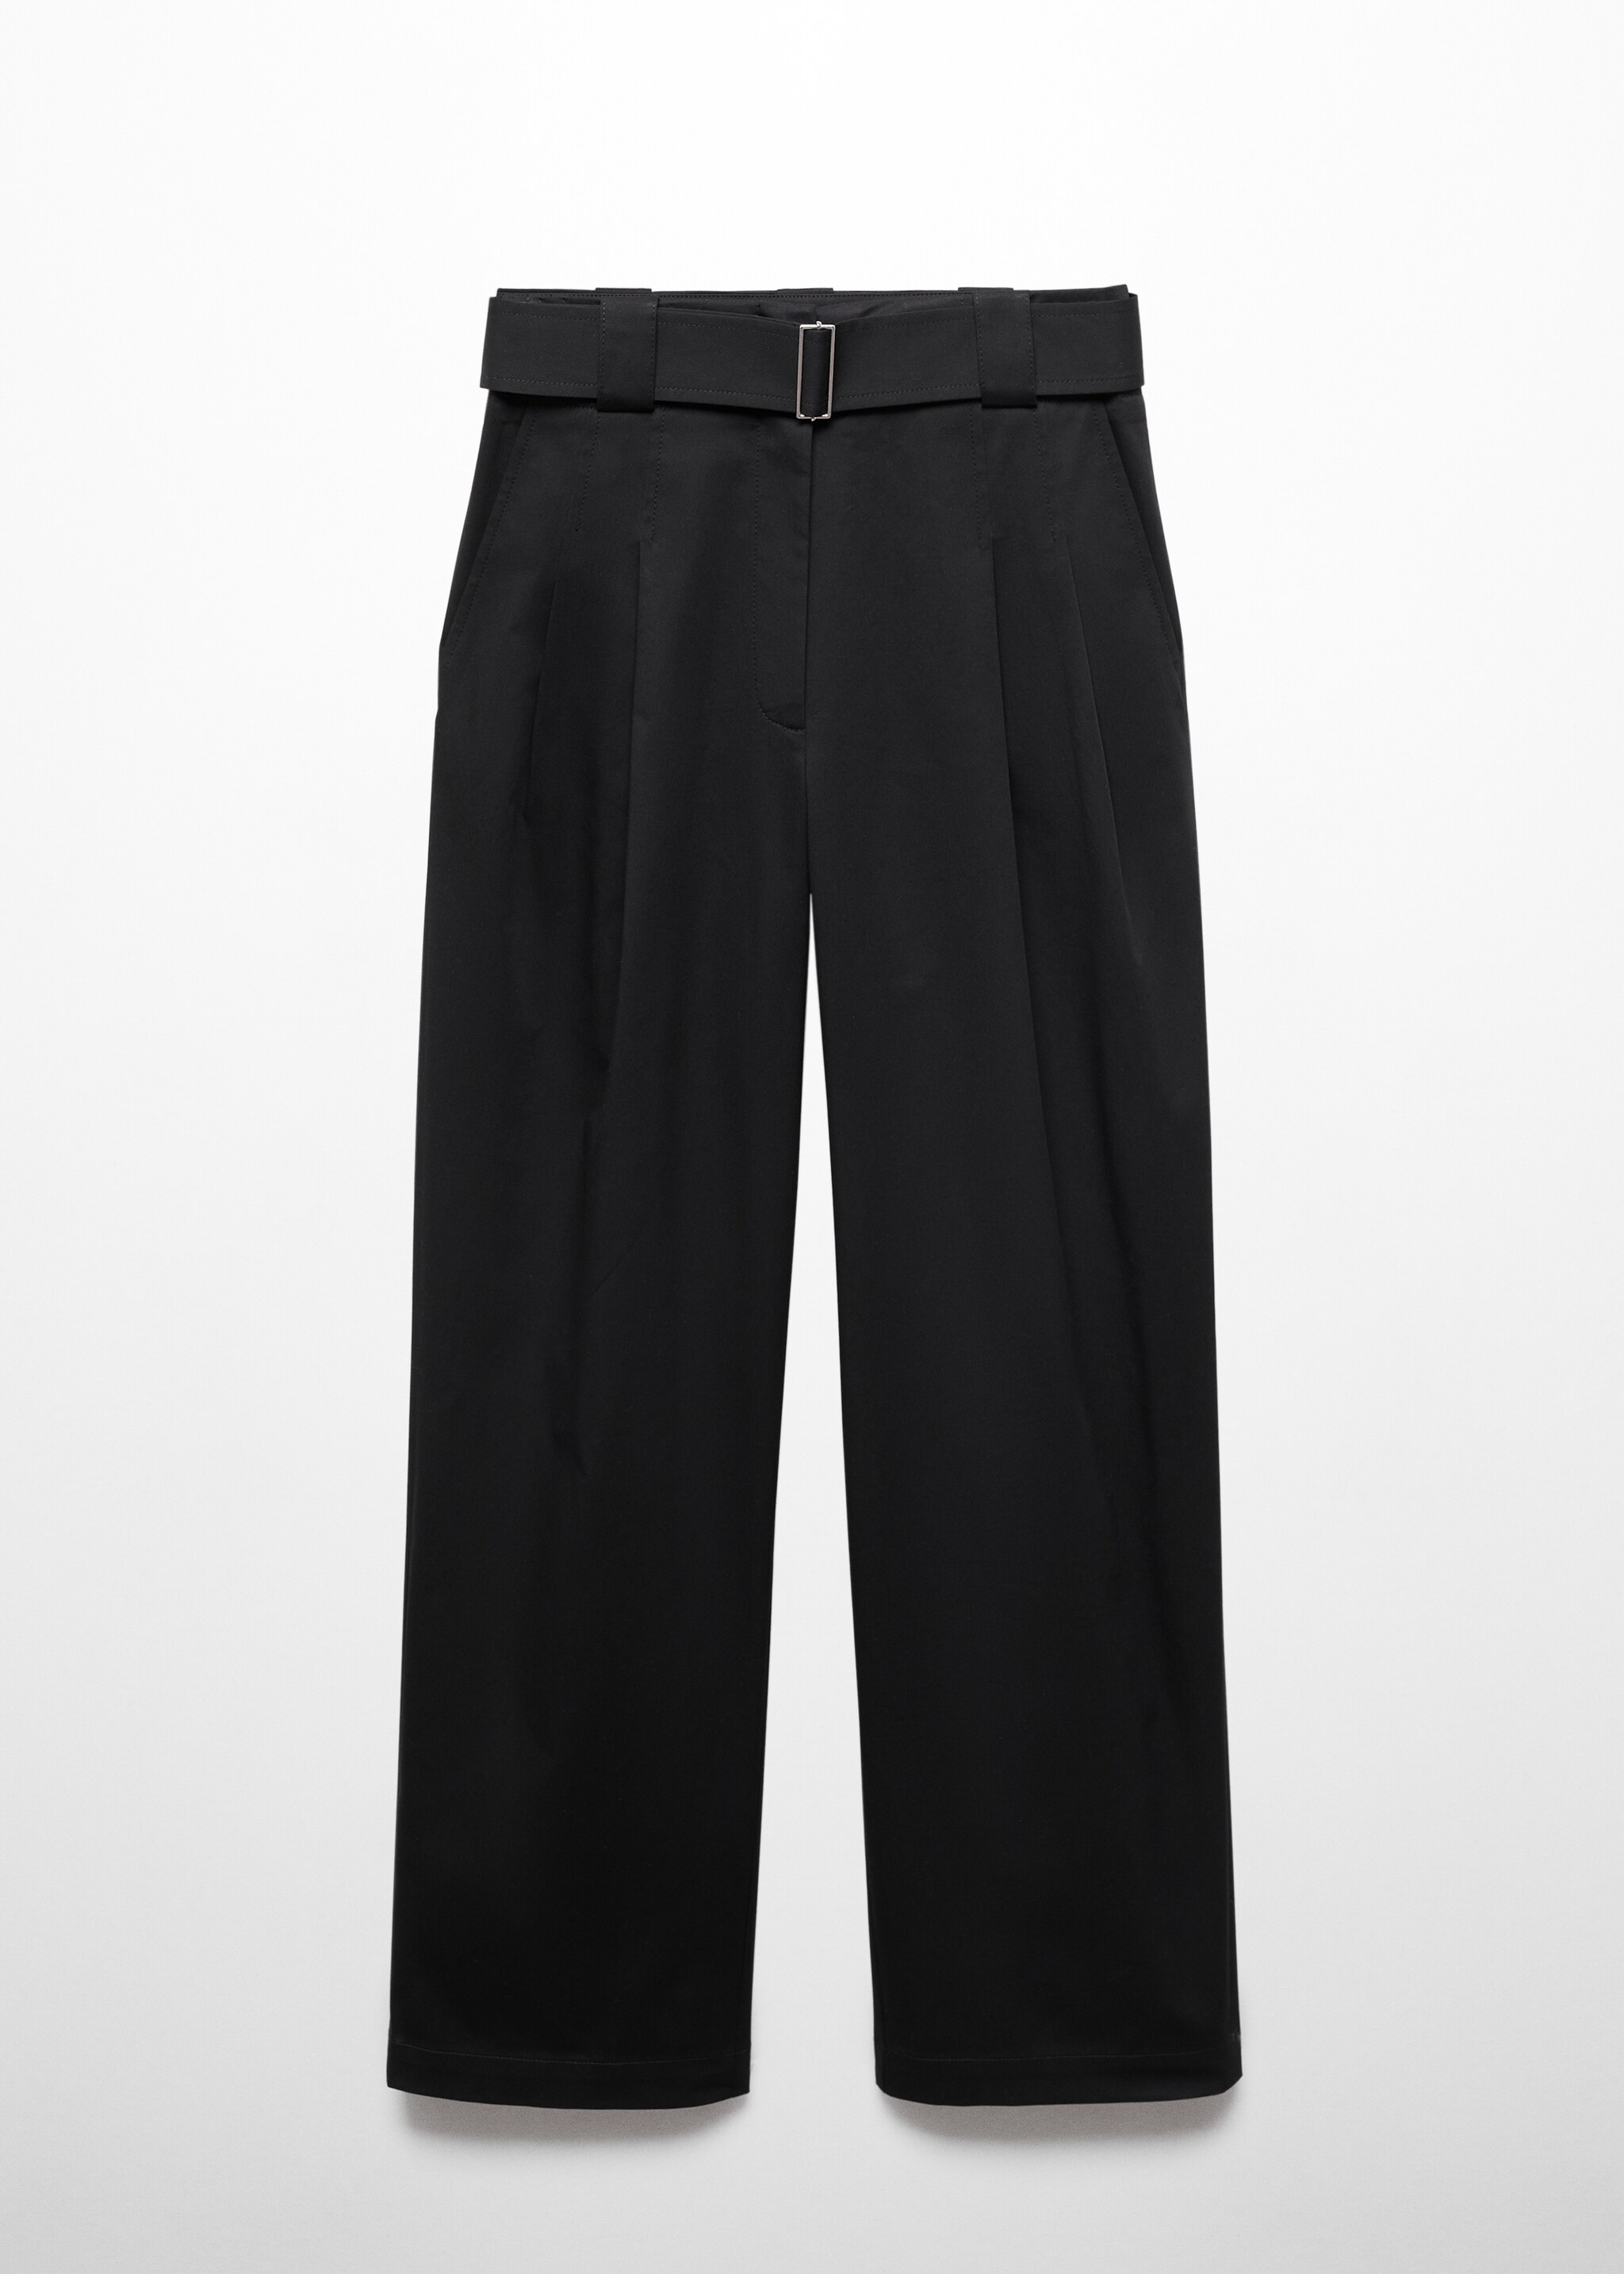 Pleated suit pants - Article without model